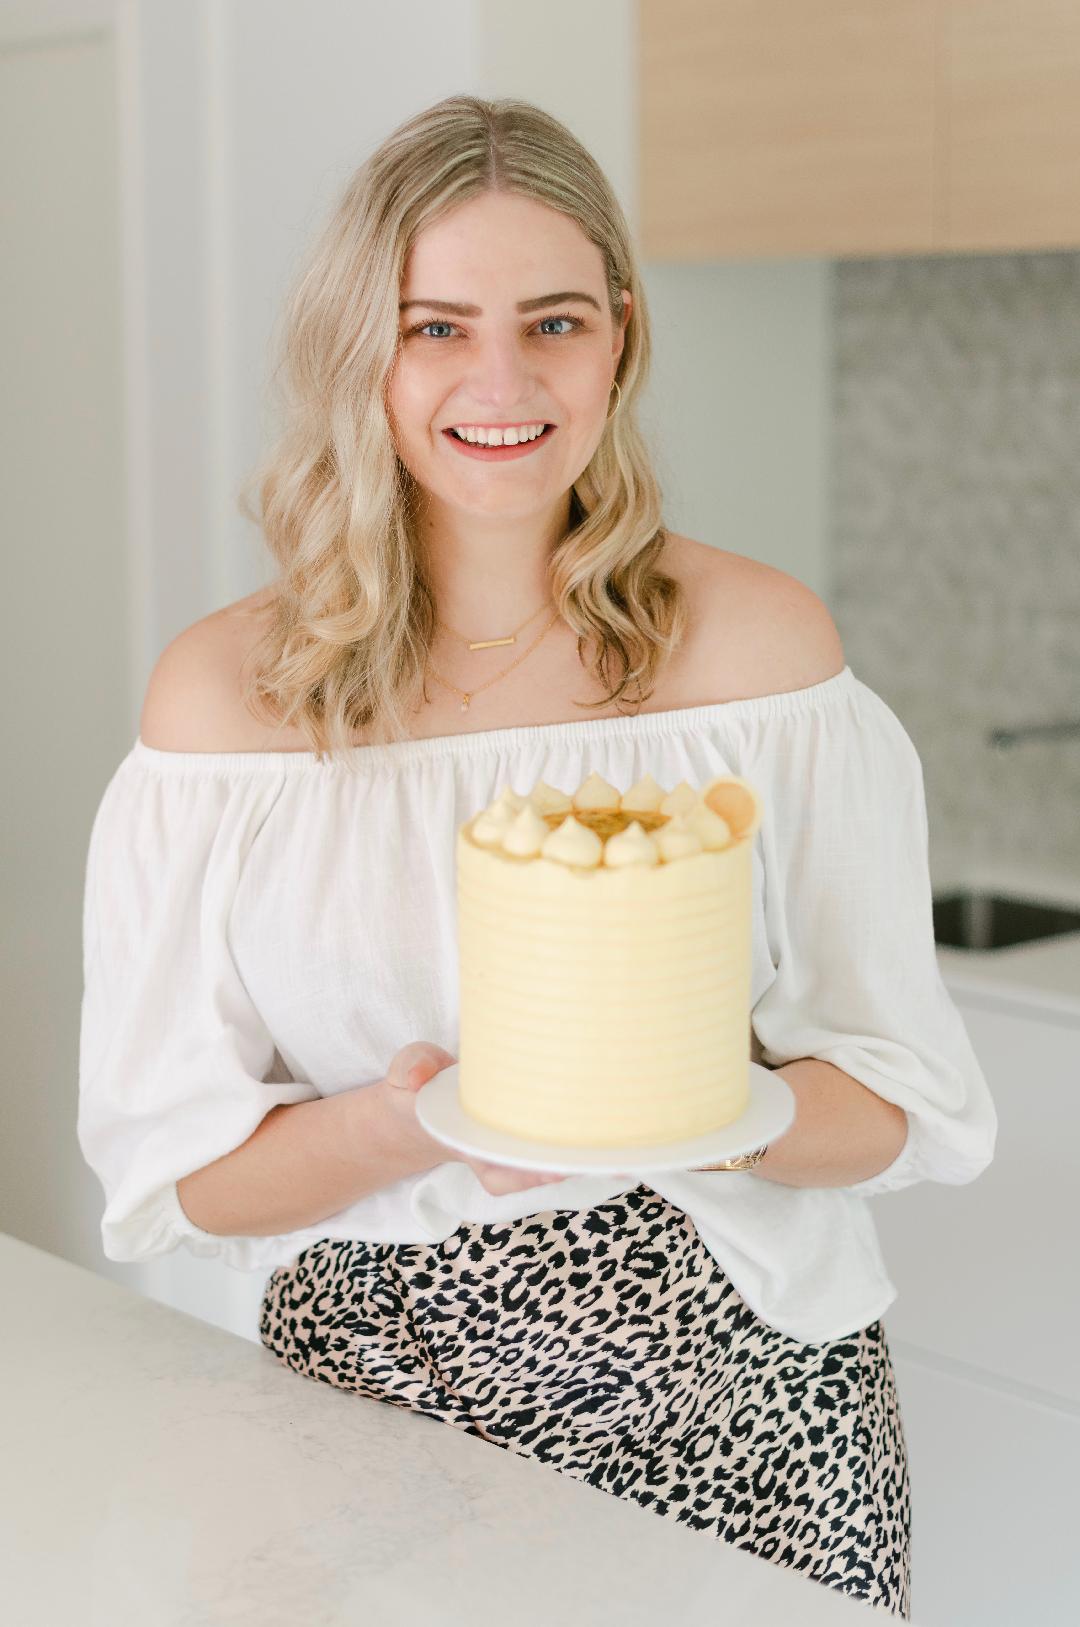 Smart Thinker: the Kiwi baker empowering conversations about mental health with cake